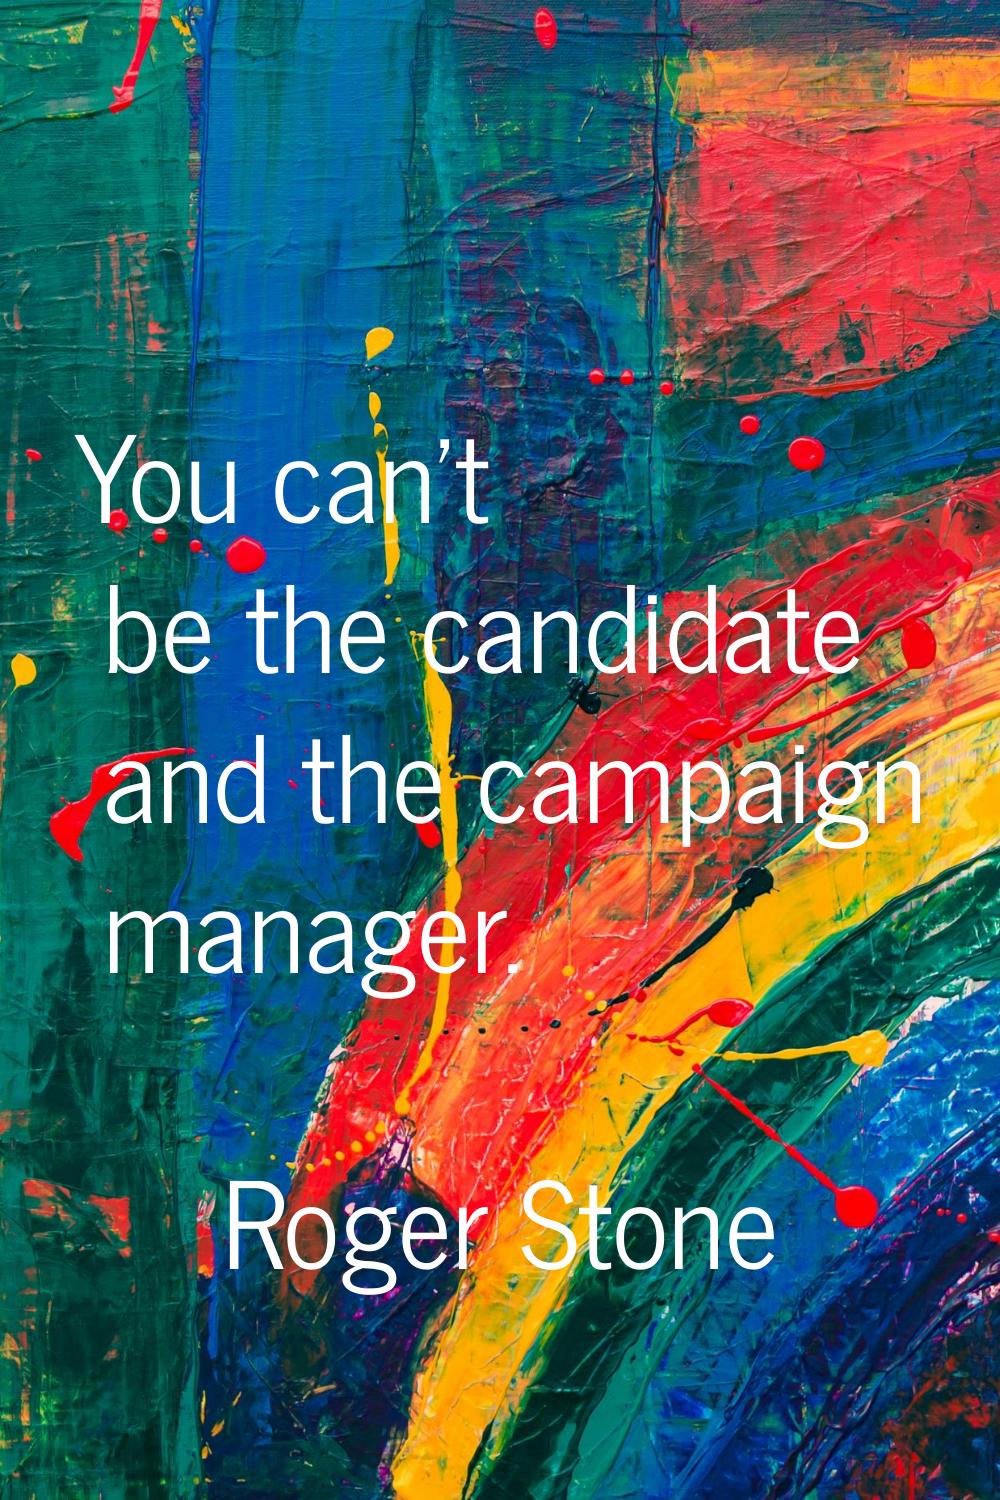 You can't be the candidate and the campaign manager.